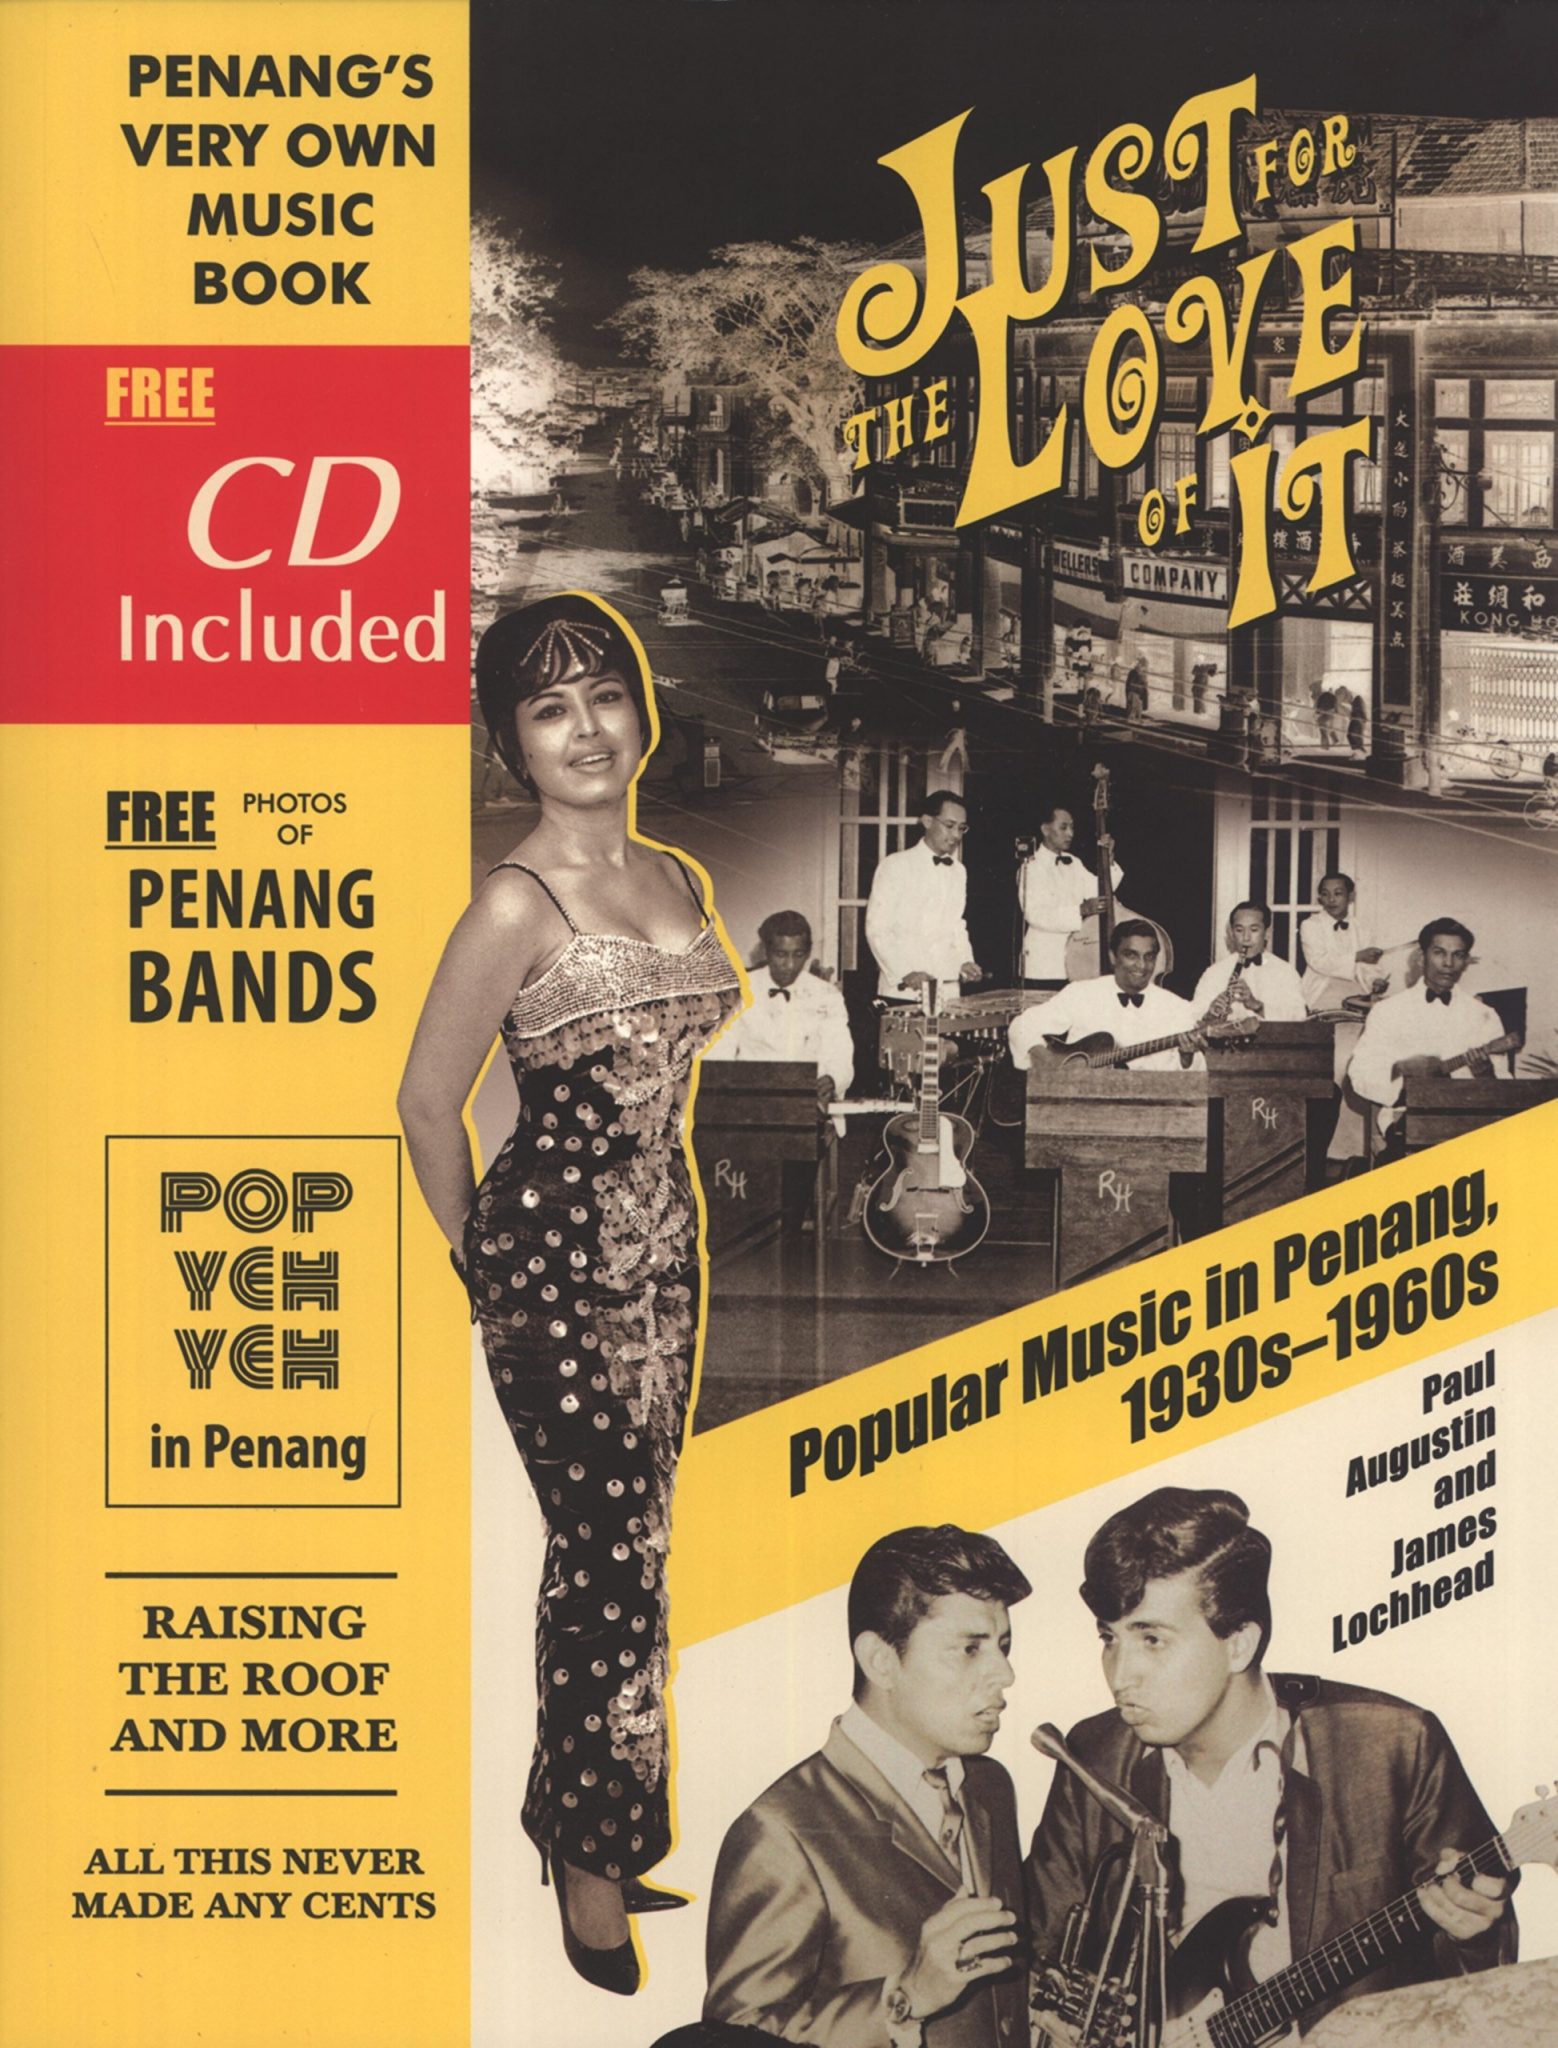 Just for the Love of It: Popular Music in Penang, 1930s–1960s, by Paul Augustin and James Lochhead. ARA Winter 16 Book